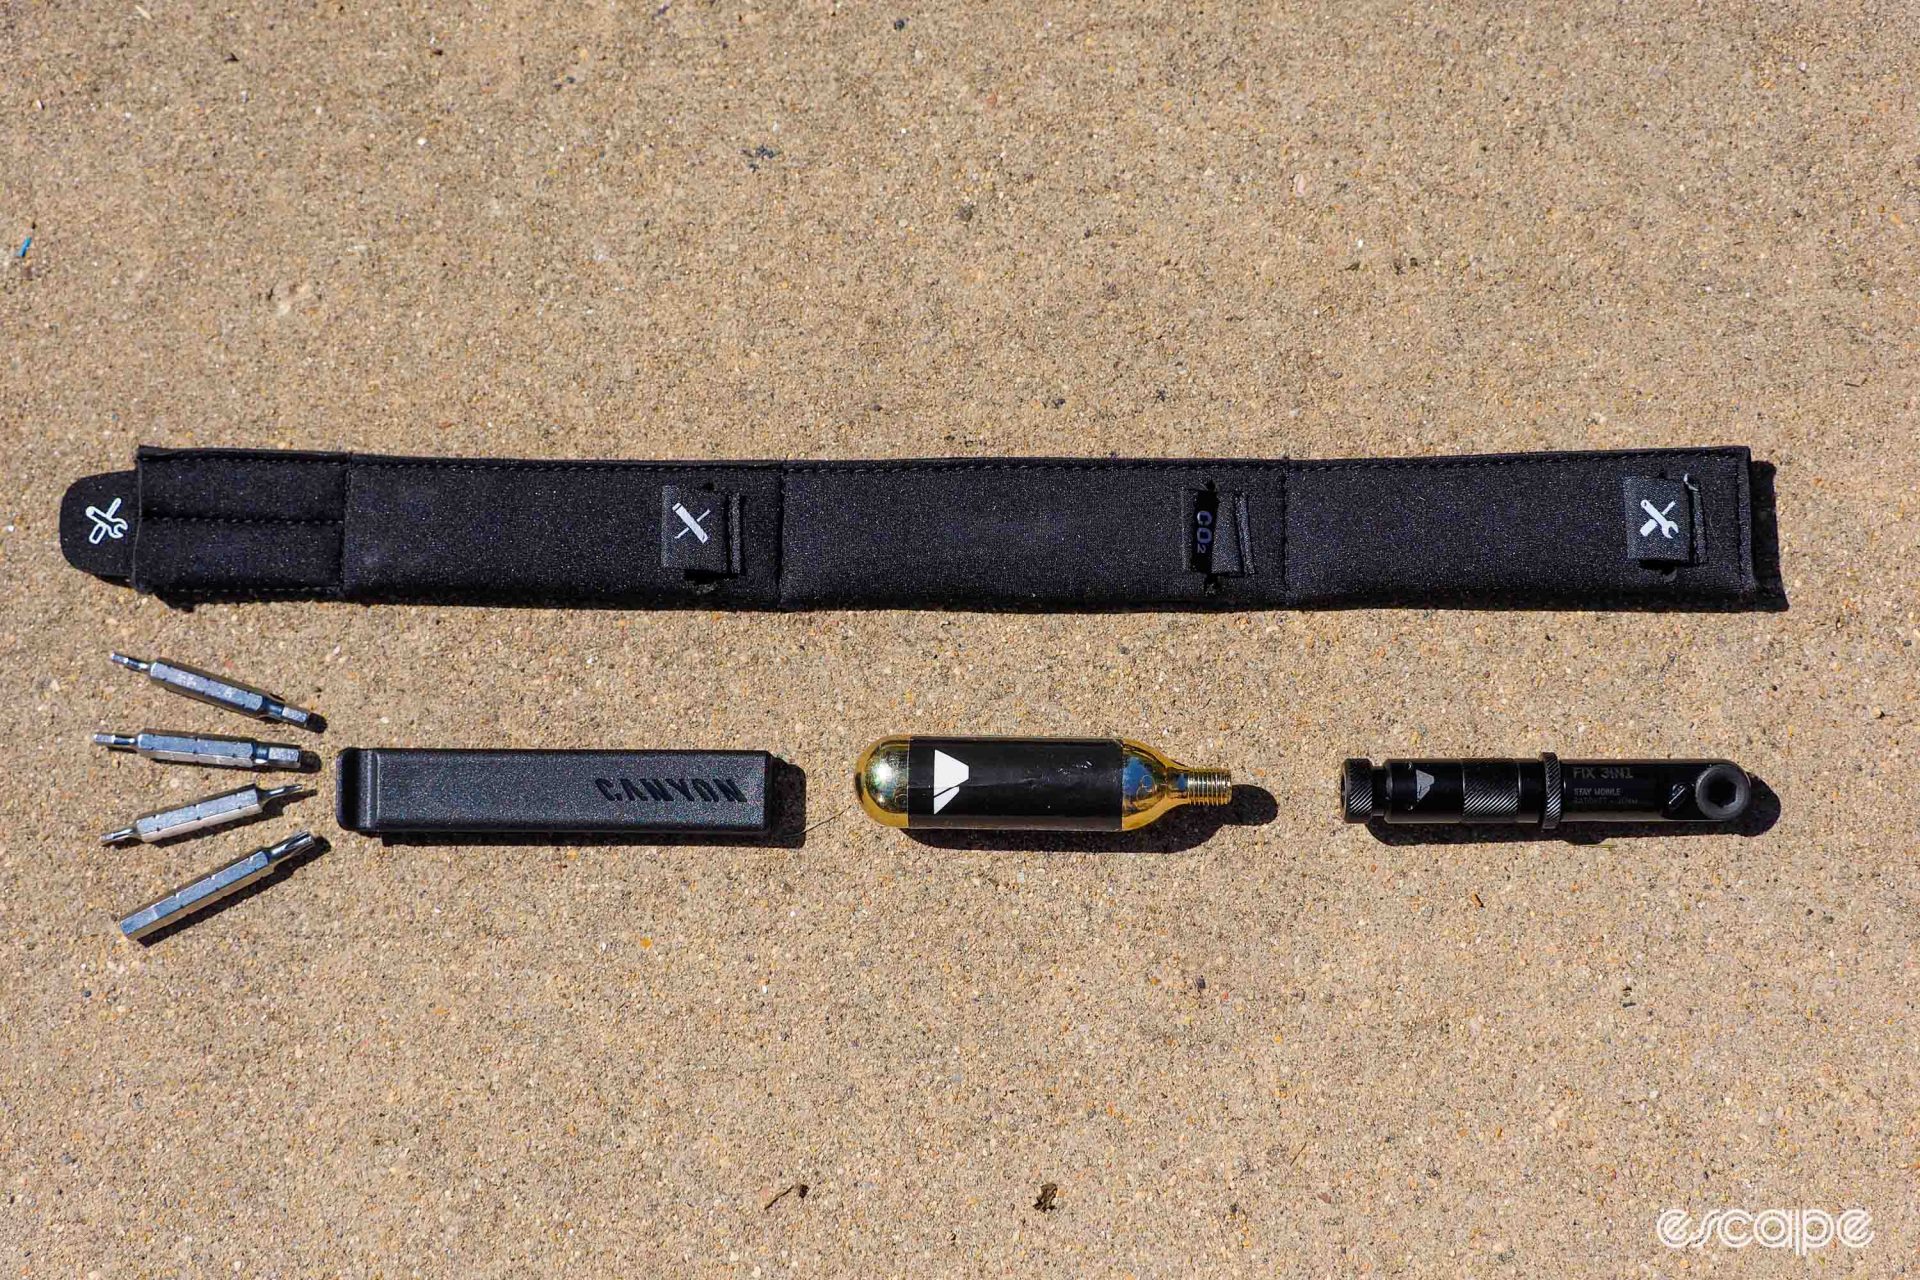 Canyon includes a neoprene sleeve to hold tools (not included) to fit in the storage compartment. The sleeve will fit a minitool with hex heads, CO2 cartridge, and tire lever, all shown here.